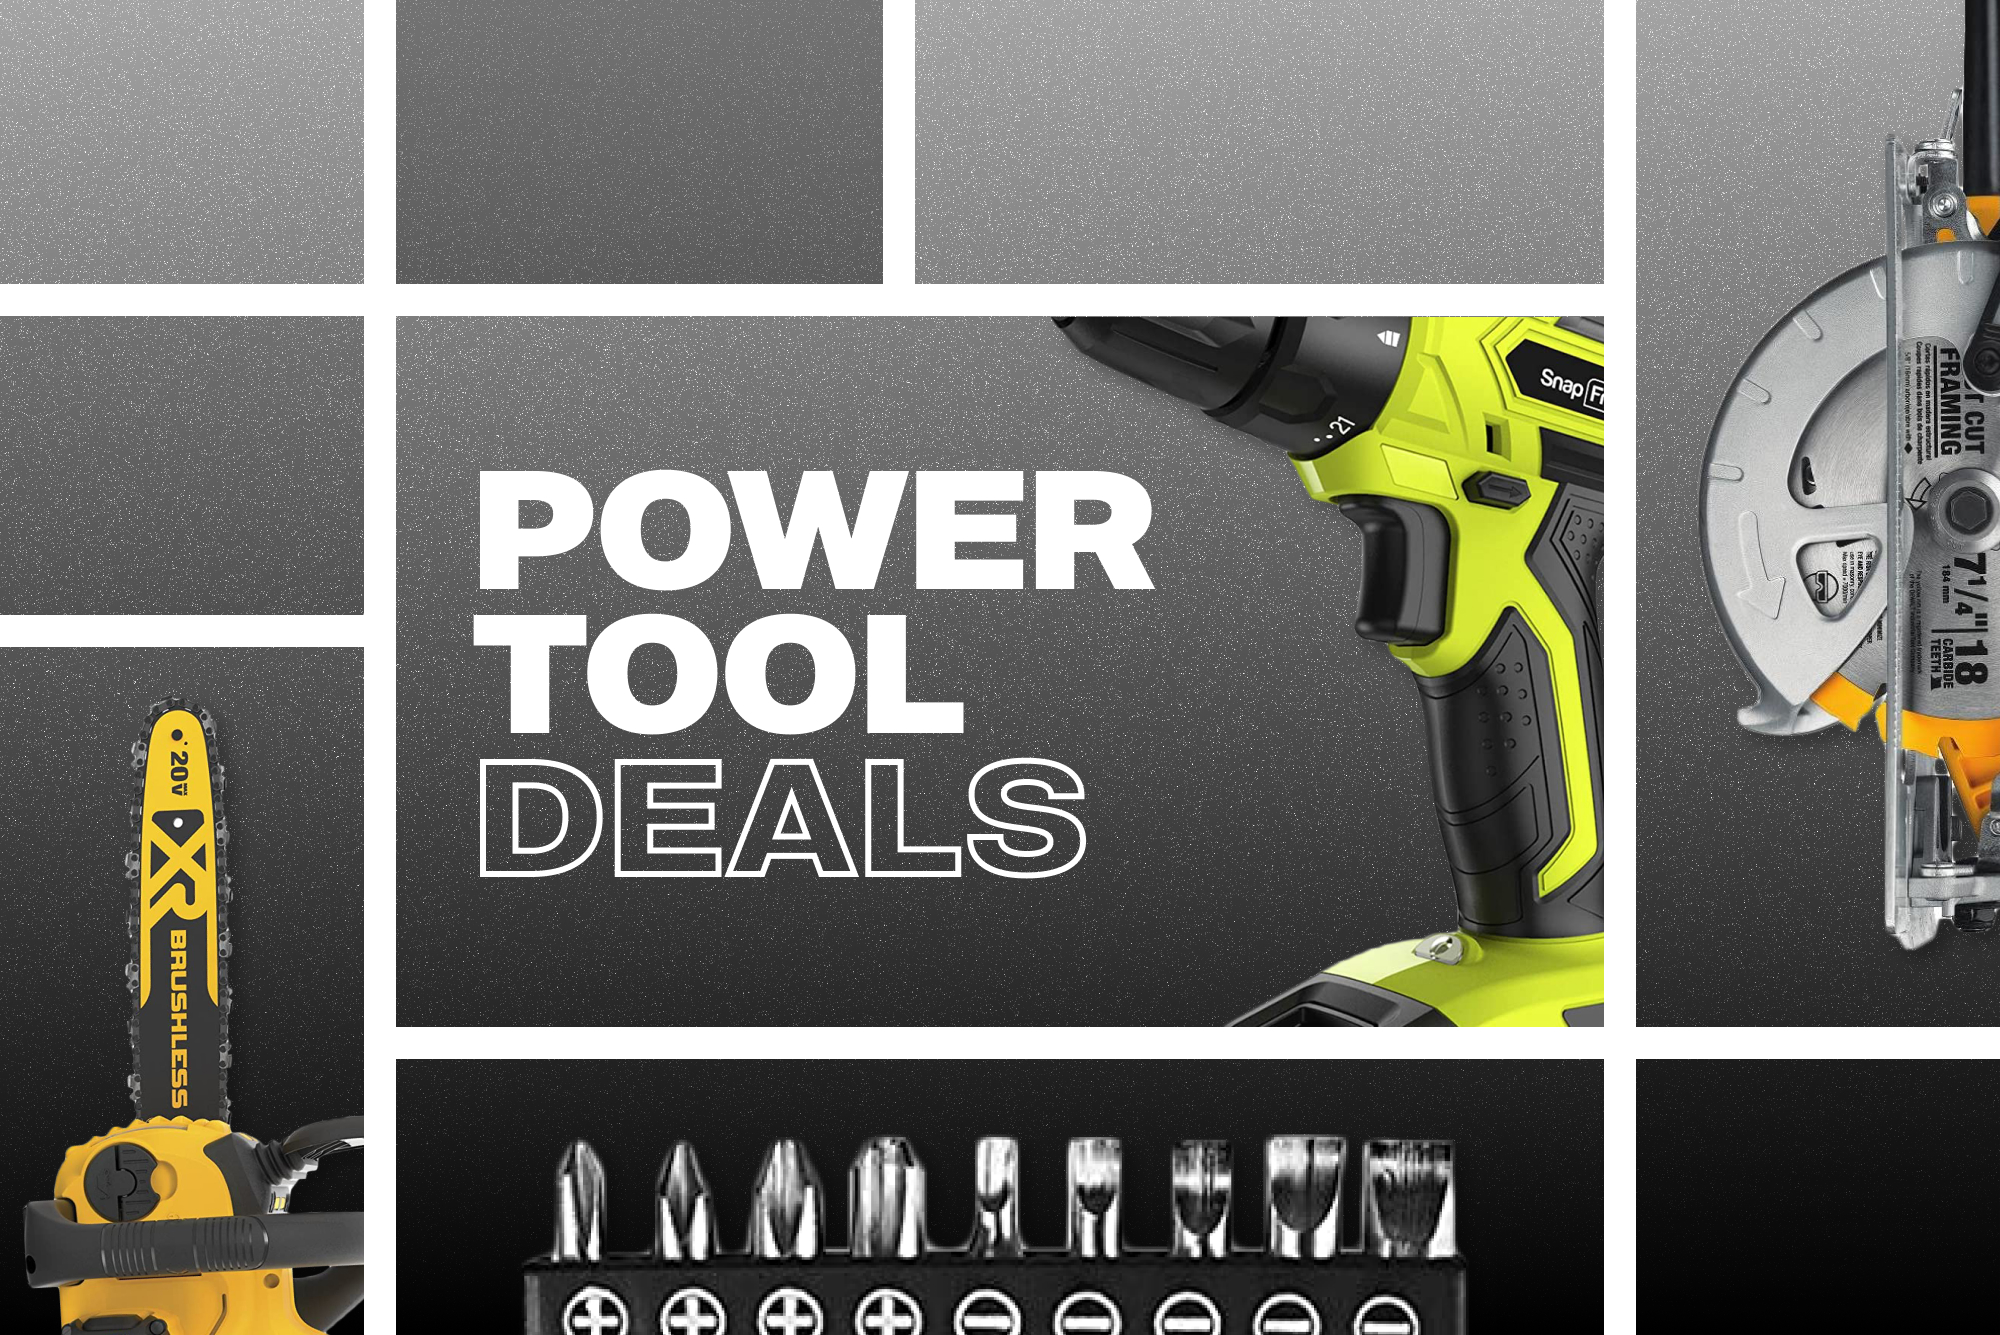 https://www.themanual.com/wp-content/uploads/sites/9/2021/06/prime-day-2021-power-tools.jpg?fit=800%2C800&p=1